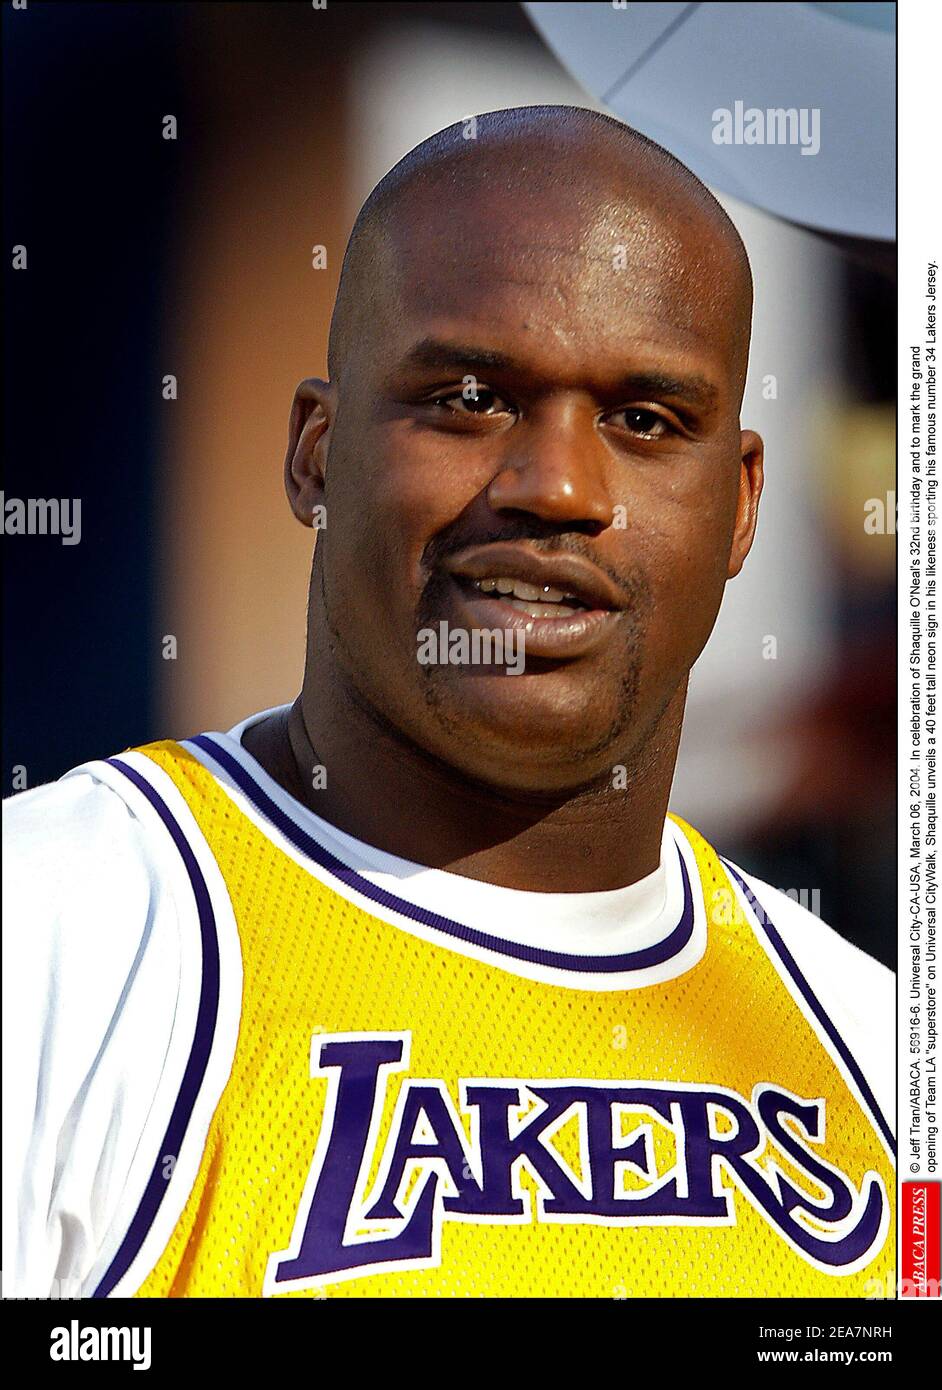 In celebration of Shaquille O'Neal's 32nd birthday and to mark the grand opening of Team LA superstore on Universal CityWalk, Shaquille unveils a 40 feet tall neon sign in his likeness sporting his famous number 34 Lakers jersey. However, Shaquille attends the event wearing a Lakers jersey number 33 which was once worn by a retired Lakers player, Kareem Abdul-Jabar. (Pictured: Shaquille O'neal) UNIVERSAL CITY, CA, SATURDAY, MARCH 06 , 2004. Photo by Jeff Tran/ABACA Stock Photo